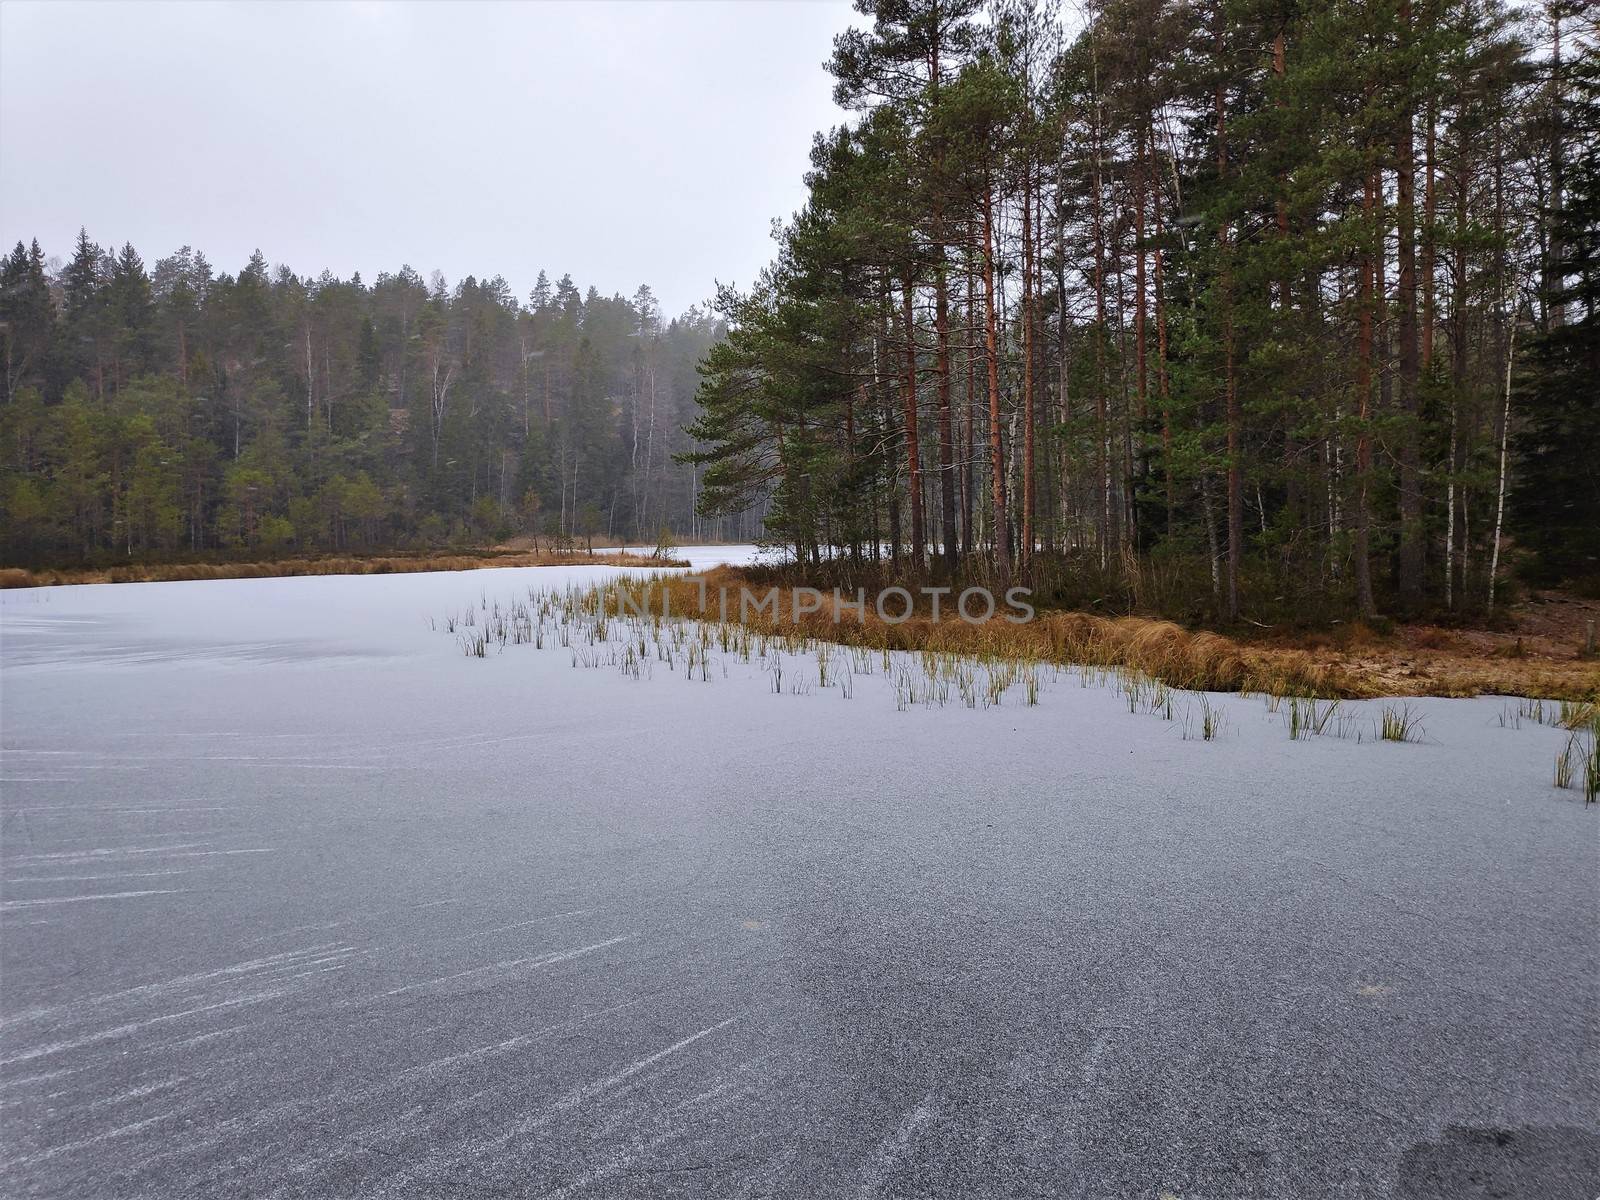 Frozen water in fron of island in Lake Haukkalampi by pisces2386